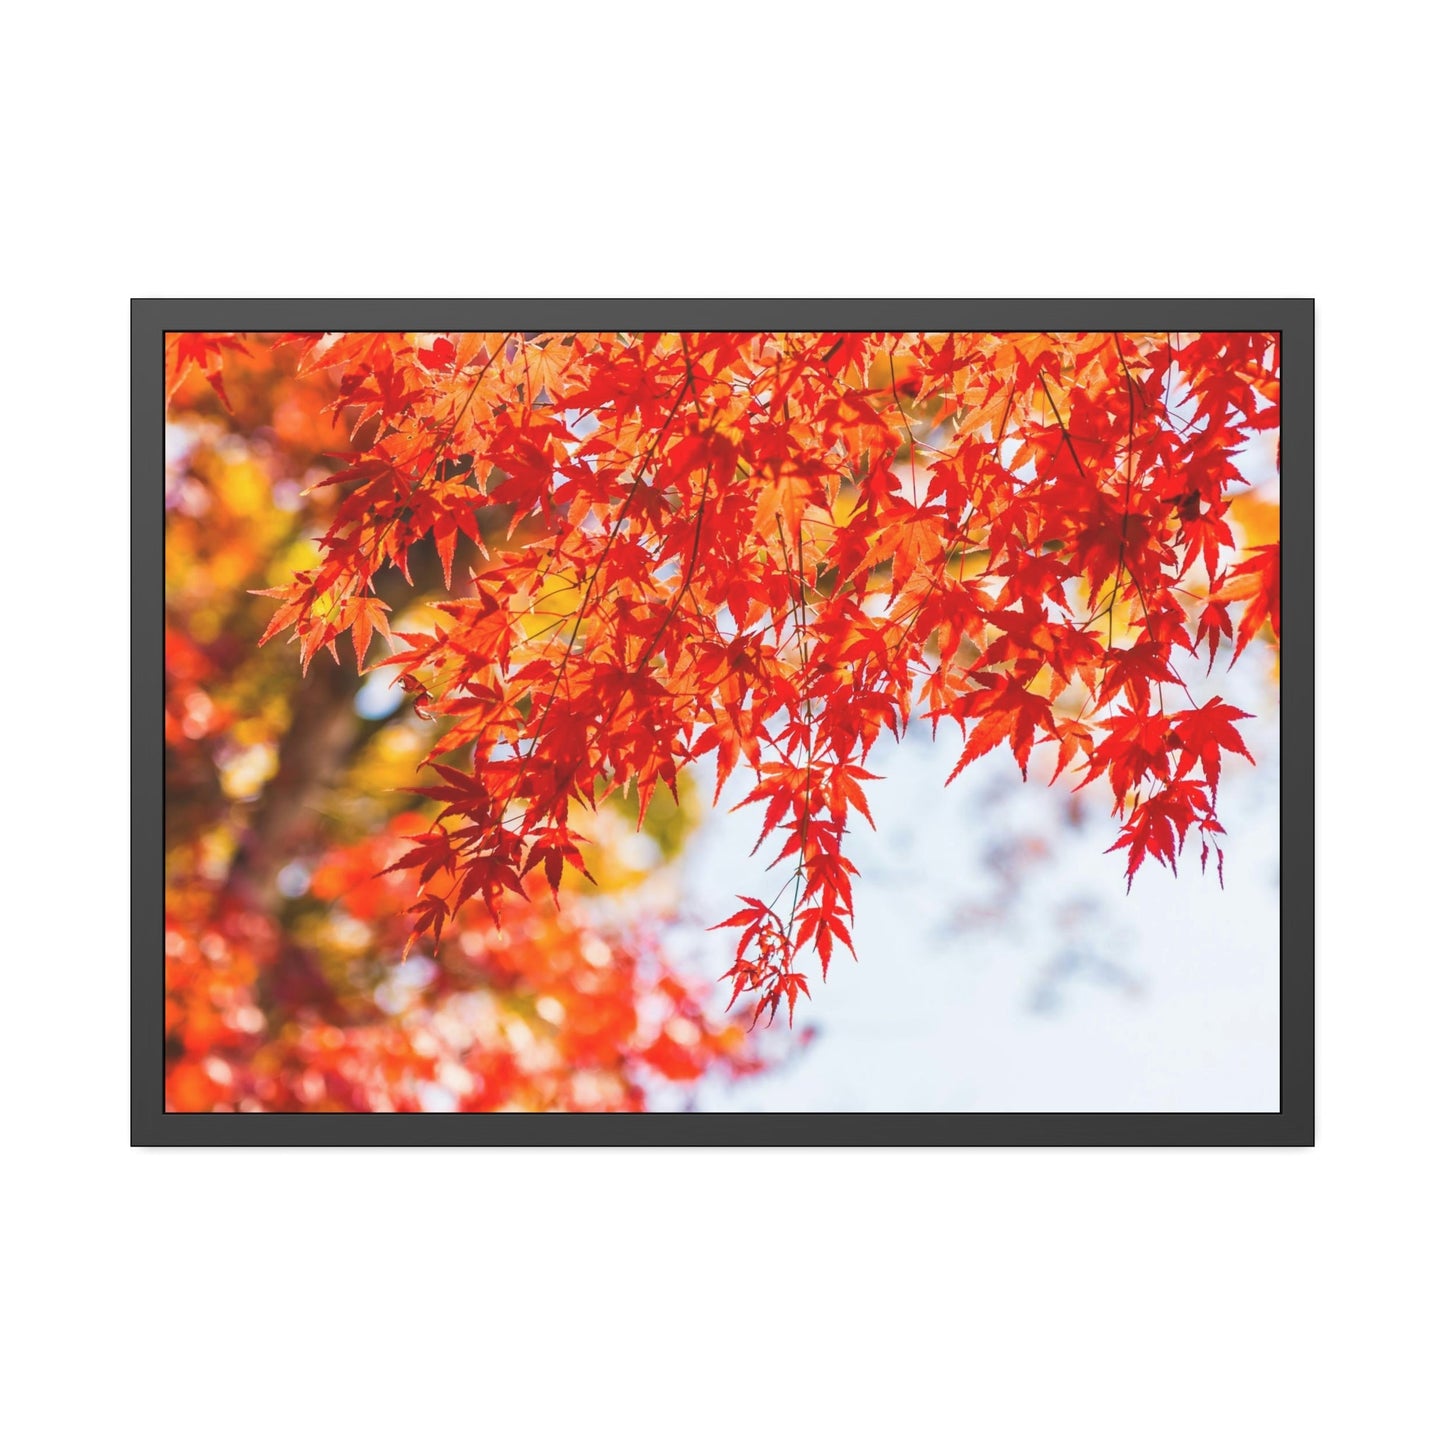 Shades of Red: Maple Trees in Fall